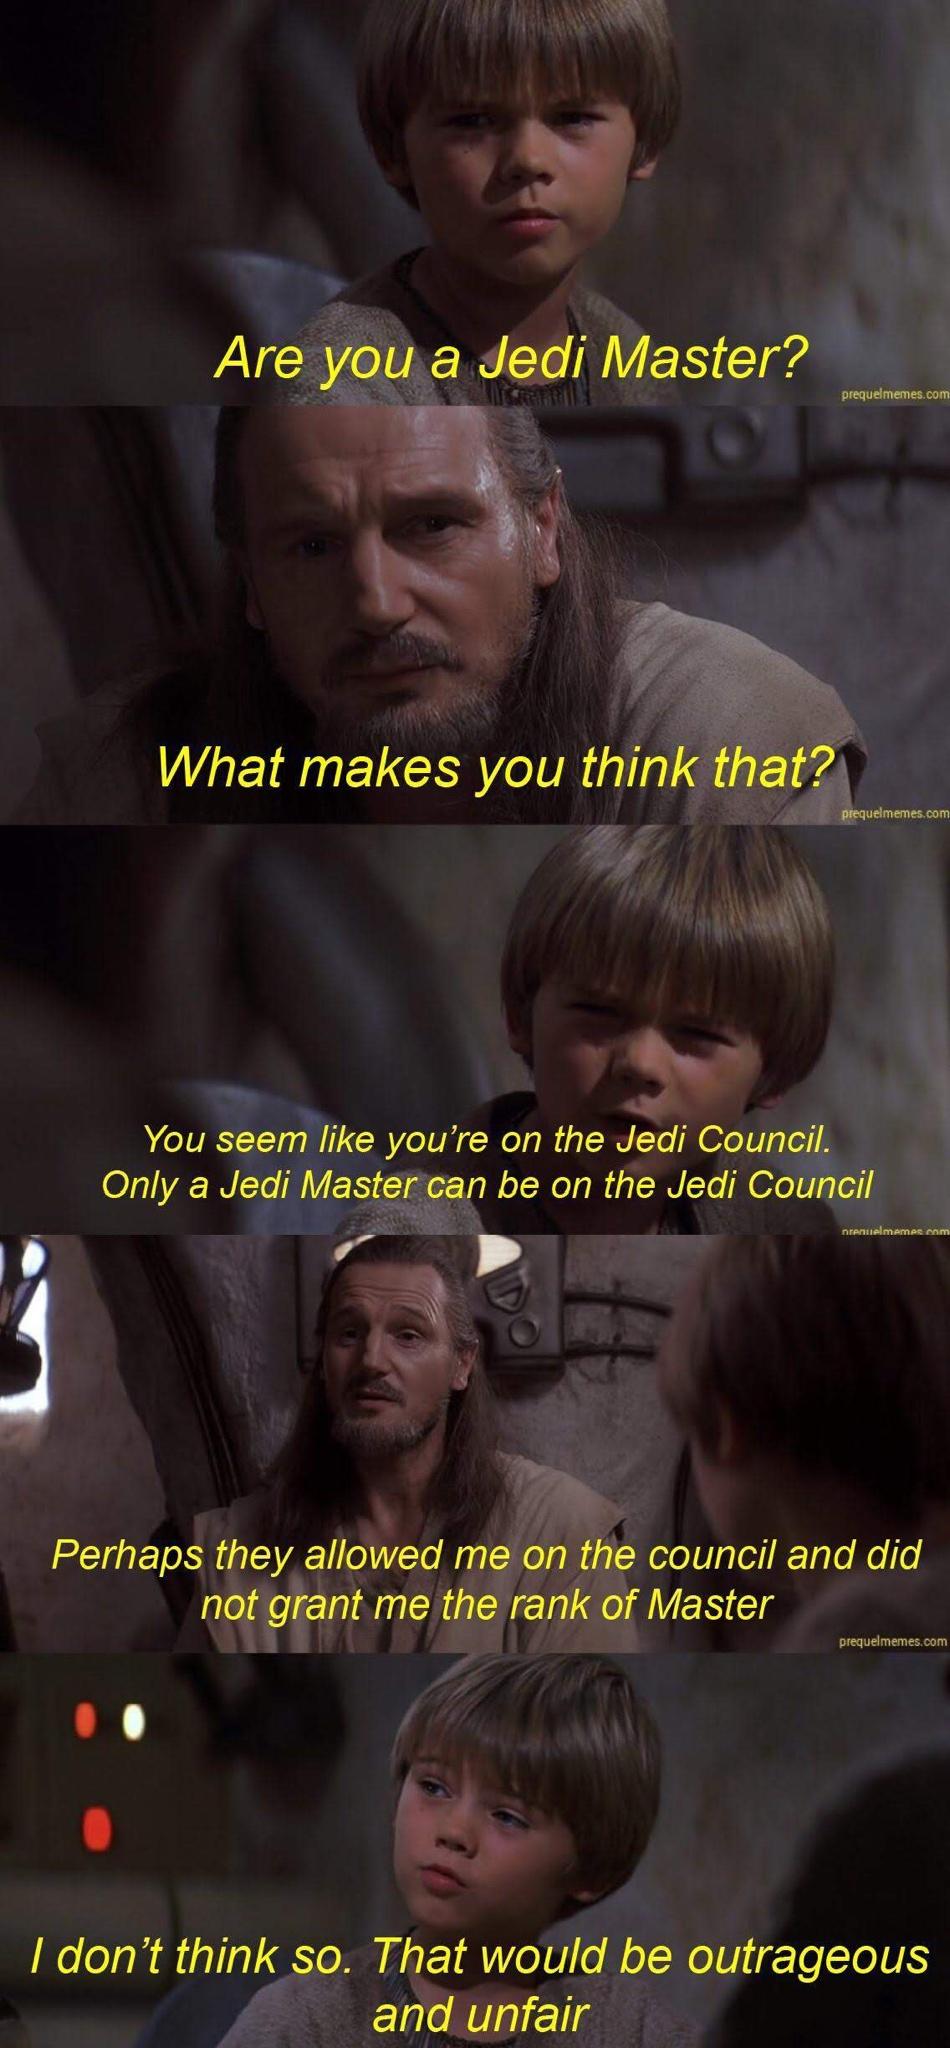 funny memes - star wars memes clean - Are you a Jedi Master? What makes you think that? prequelmemes.com prequelmemes.com You seem you're on the Jedi Council. Only a Jedi Master can be on the Jedi Council prenuelmemes.com Perhaps they allowed me on the co